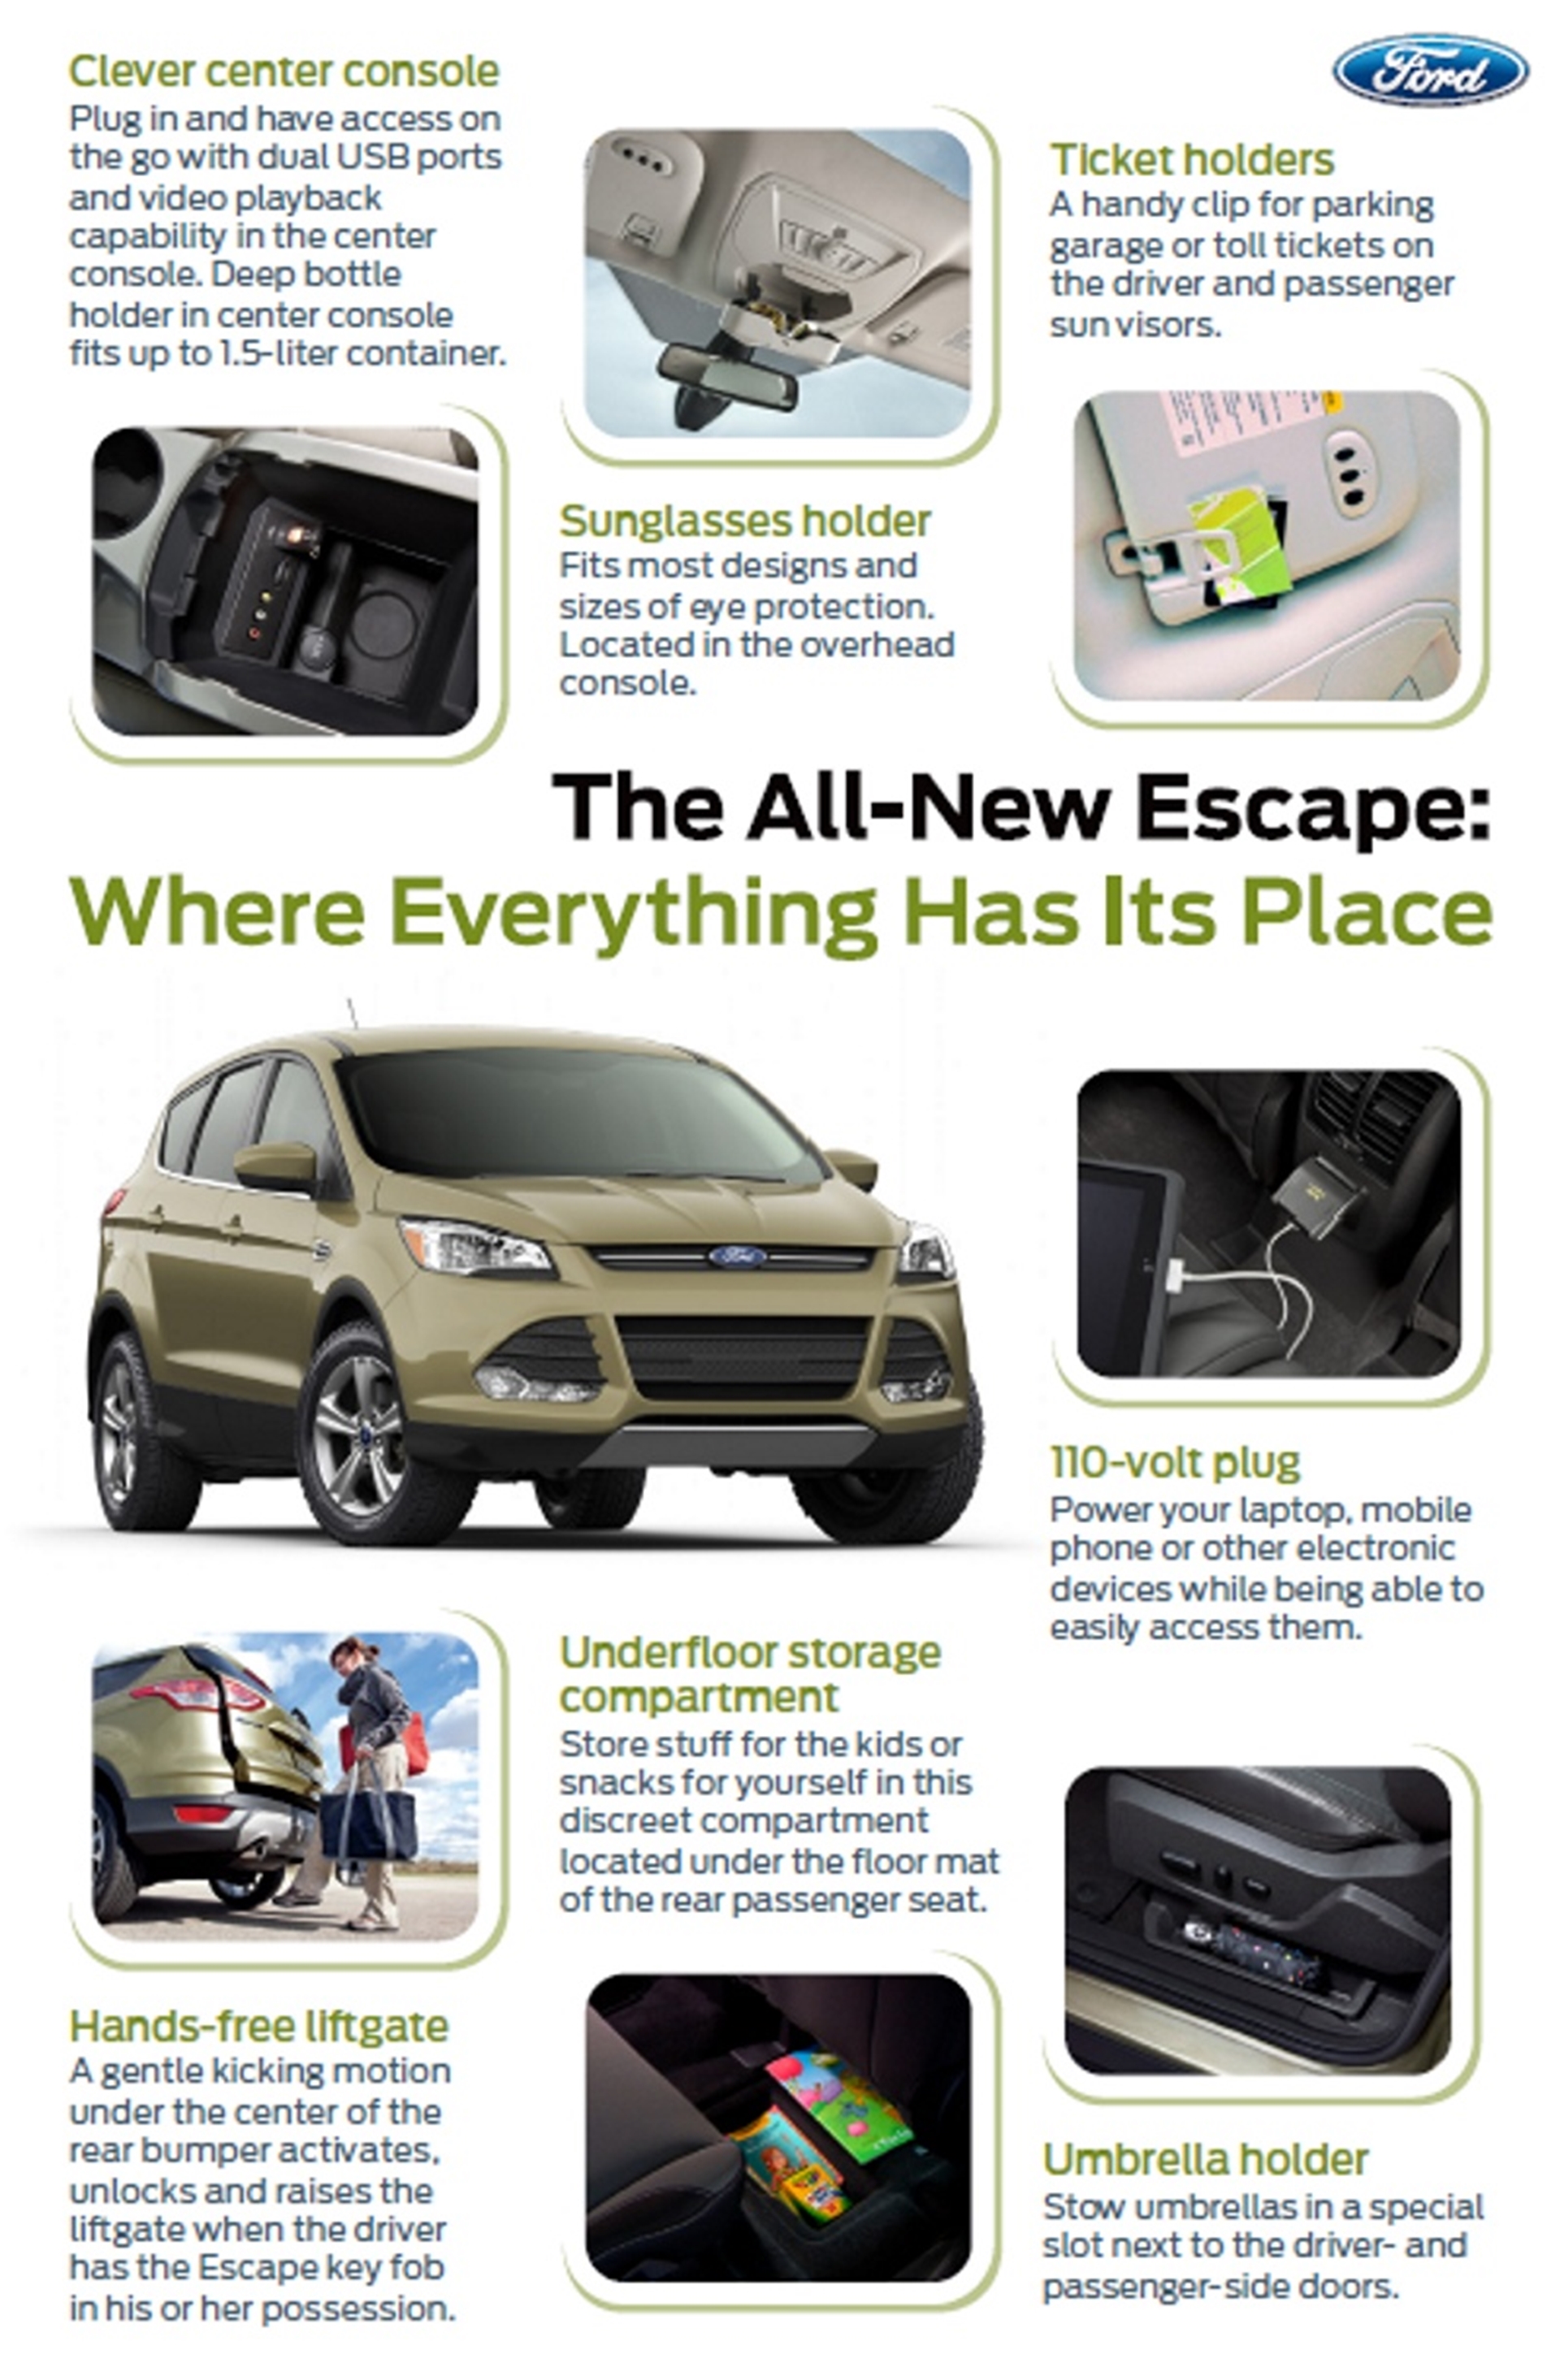 New Ford Escape Offers More Space, Clever Cargo Solutions